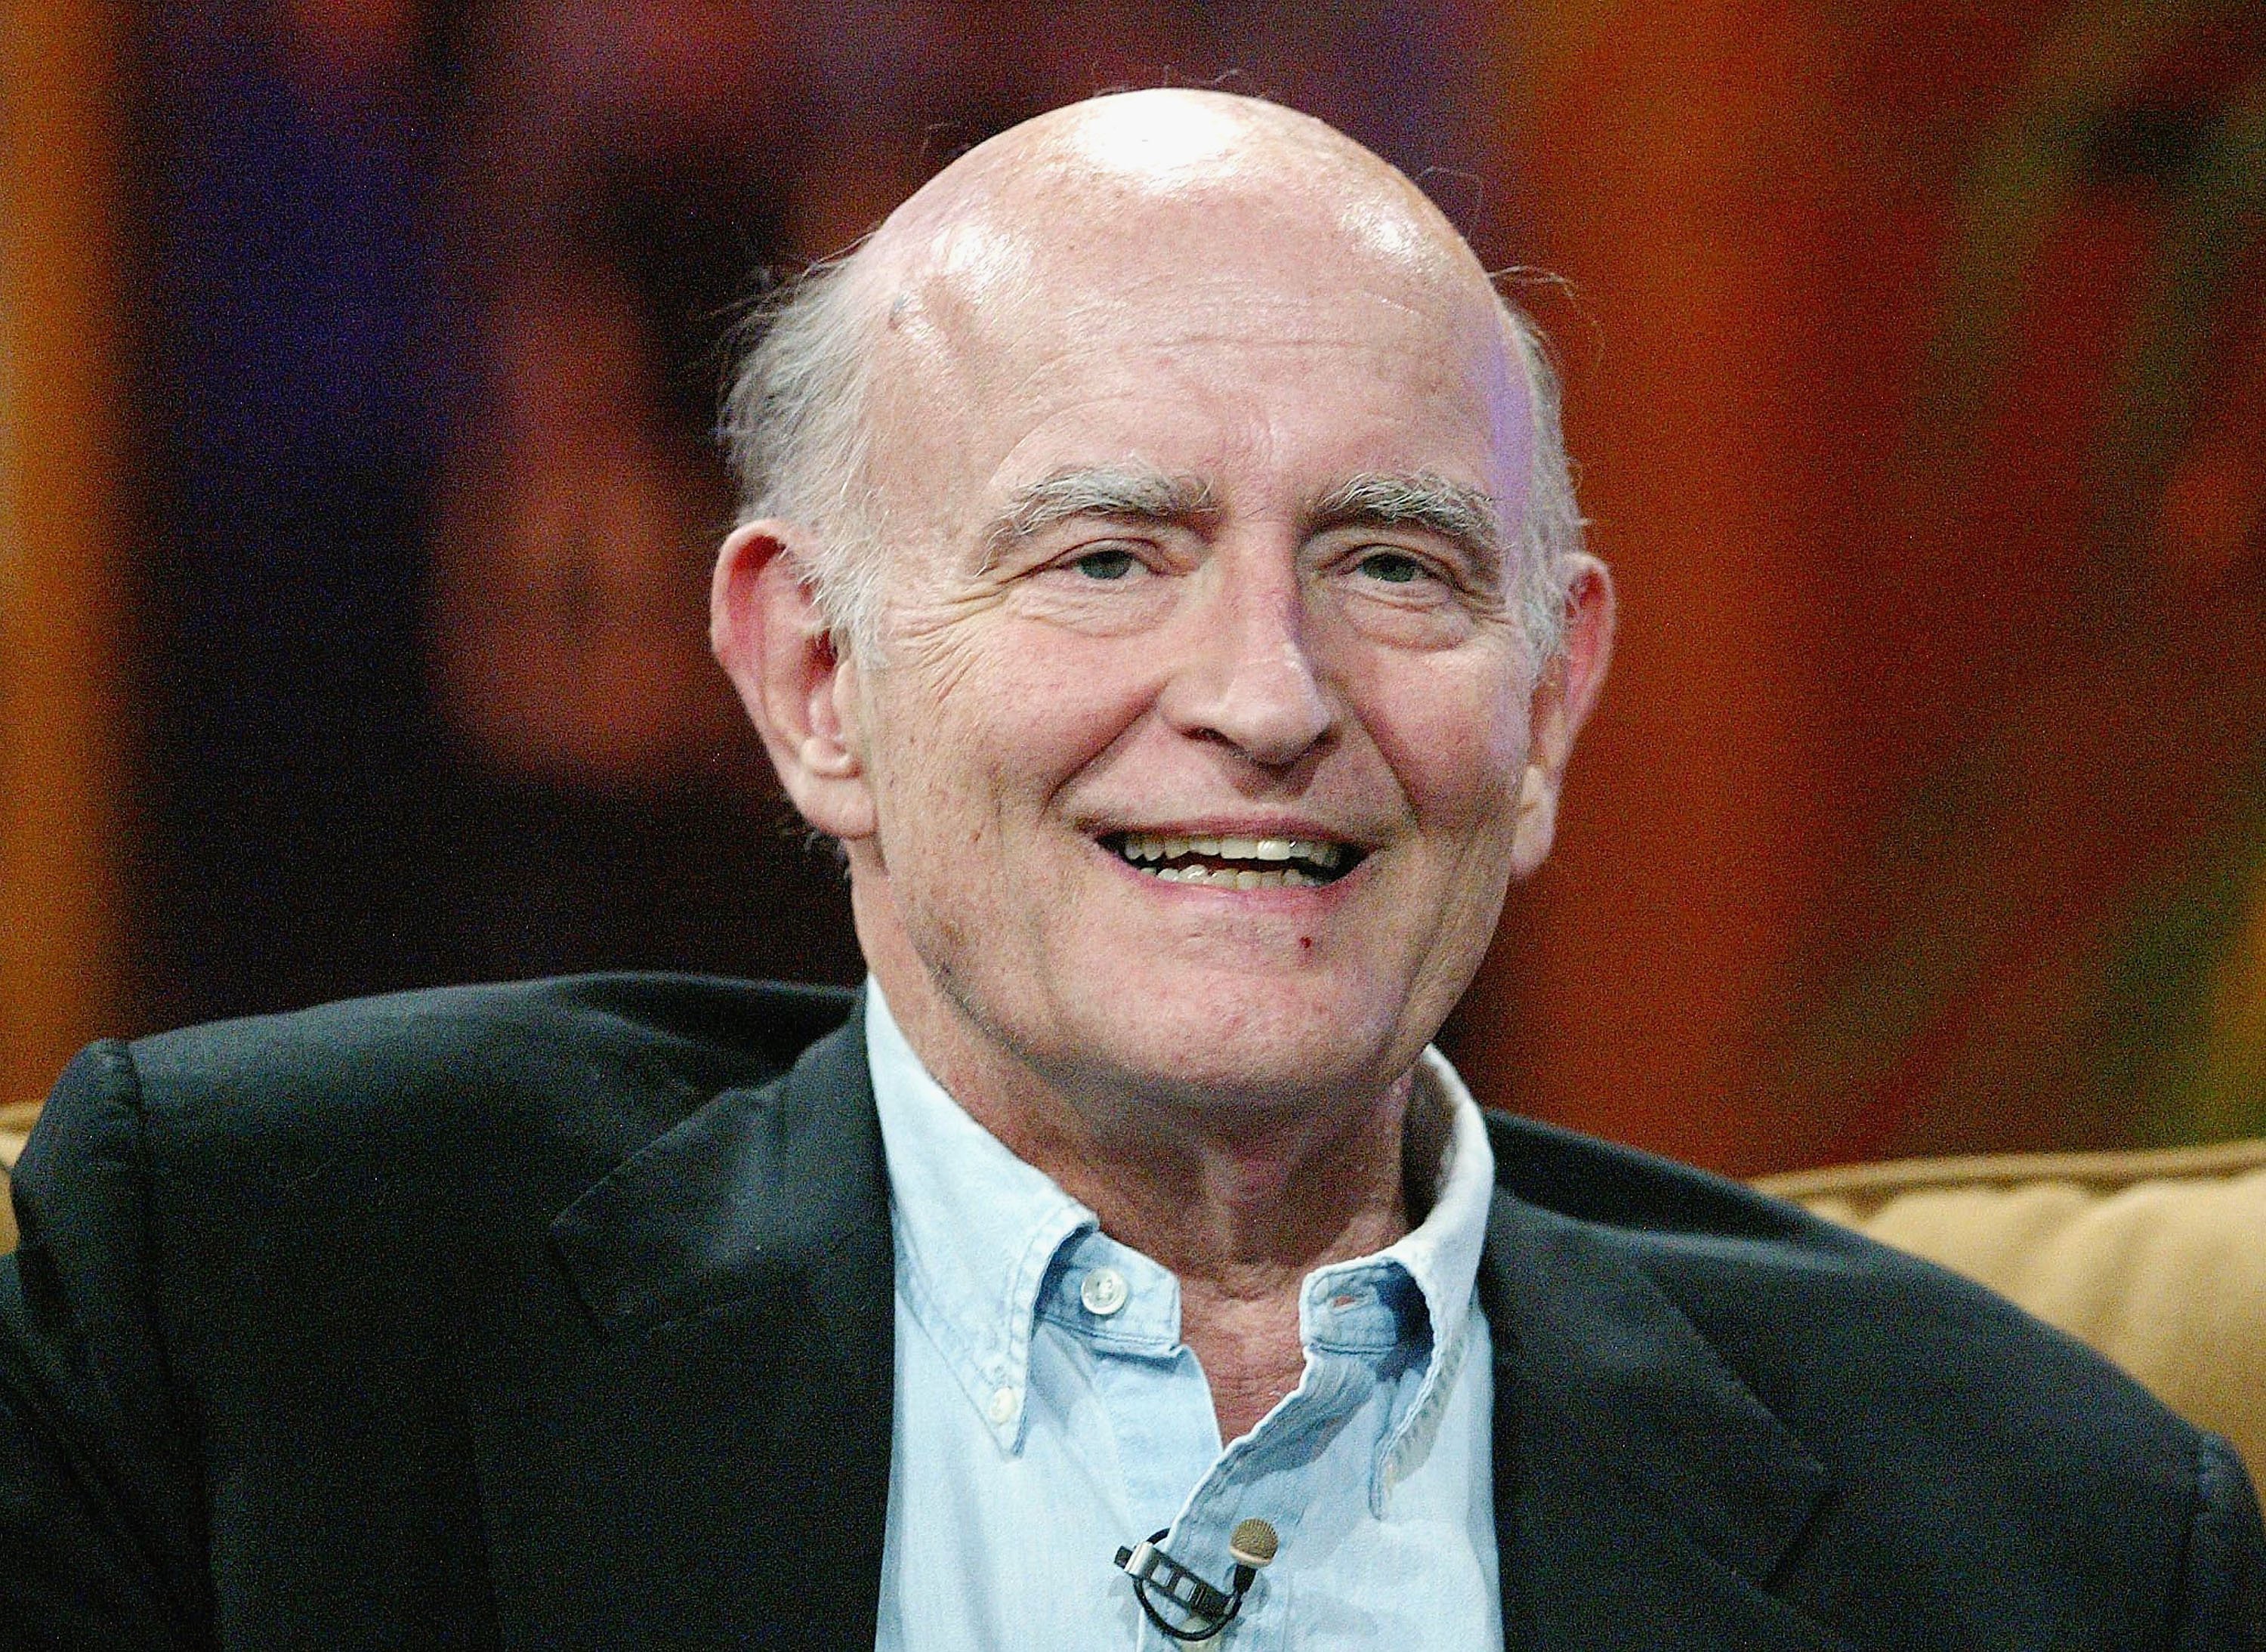 Peter Boyle speaks during the CBS 2005 Television Critics Winter Press Tour on Jan. 18, 2005 in California | Photo: Getty Images